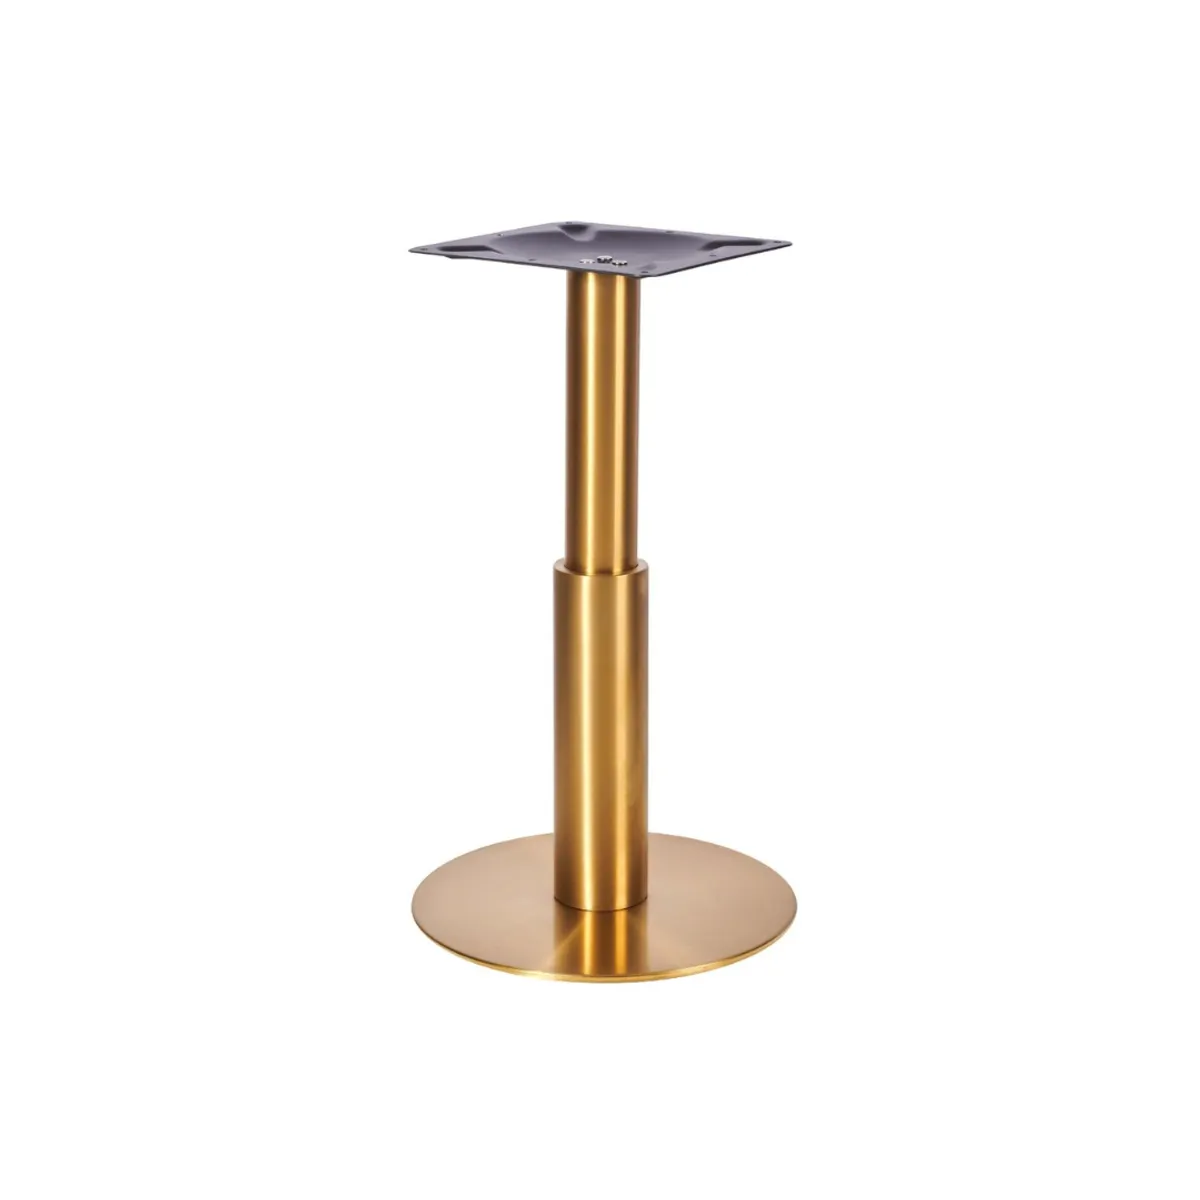 Asher small table base 2